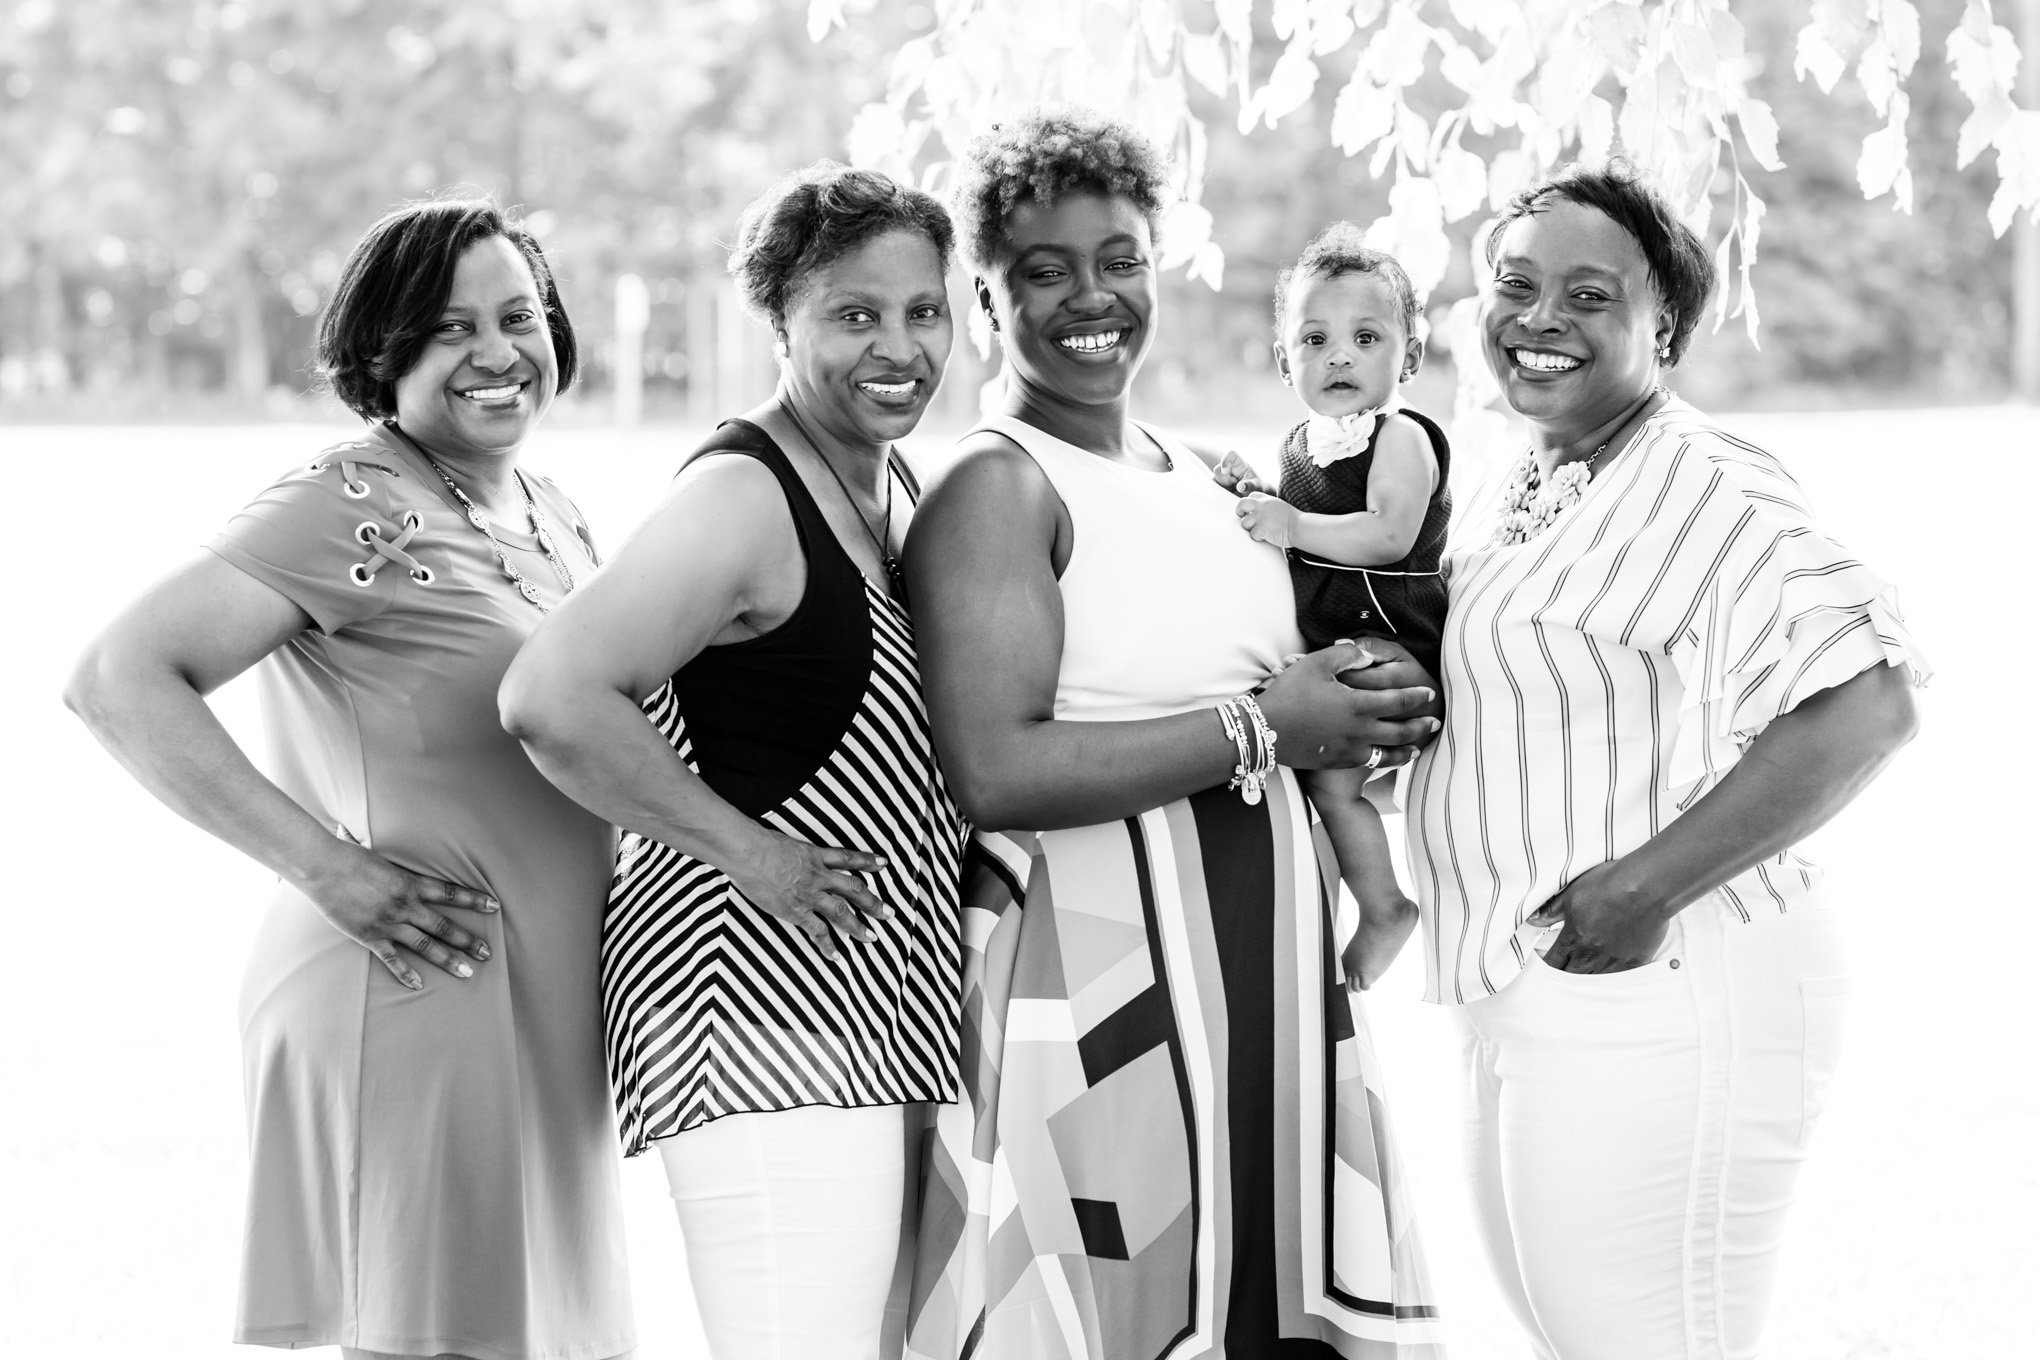 home improvement, four generations, four generations of women, family photos, extended family photos, black and white family photo, black and white photography, fashionable family photos, stylish family photos, baby girl, striped shirts, white jeans outfits